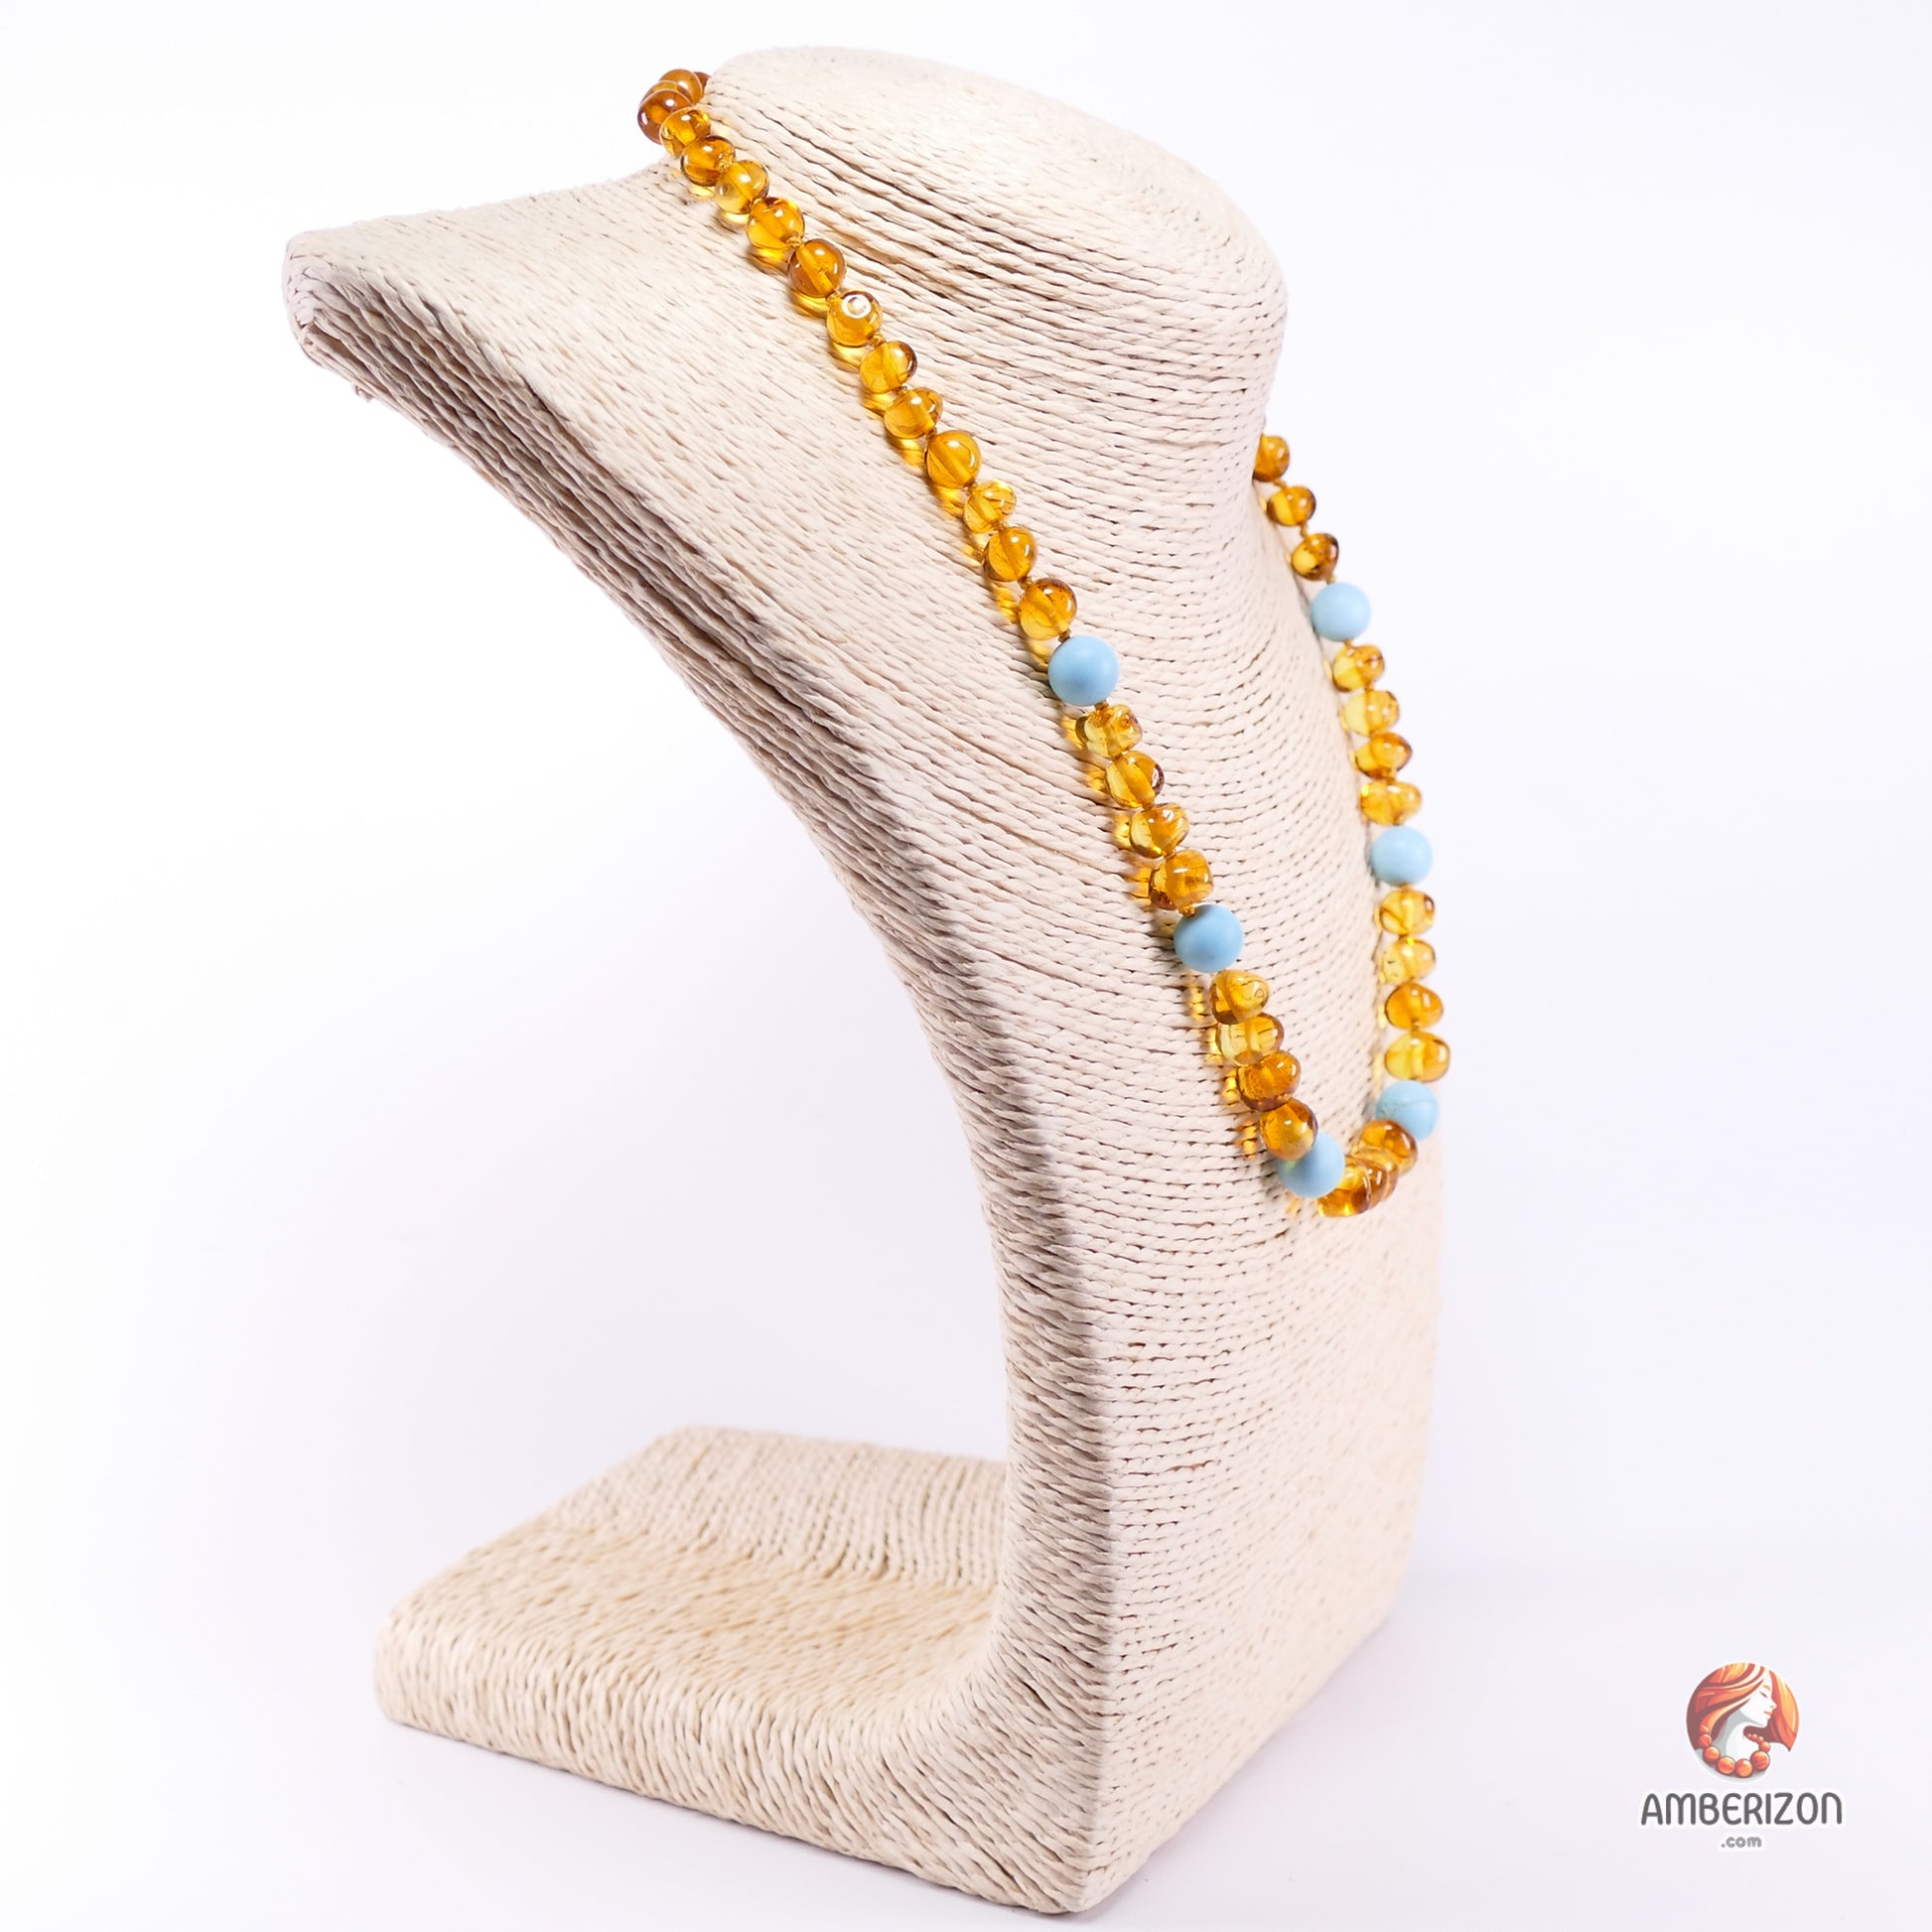 Women's necklace - Clear polished honey baroque amber beads and light blue acrylic balls